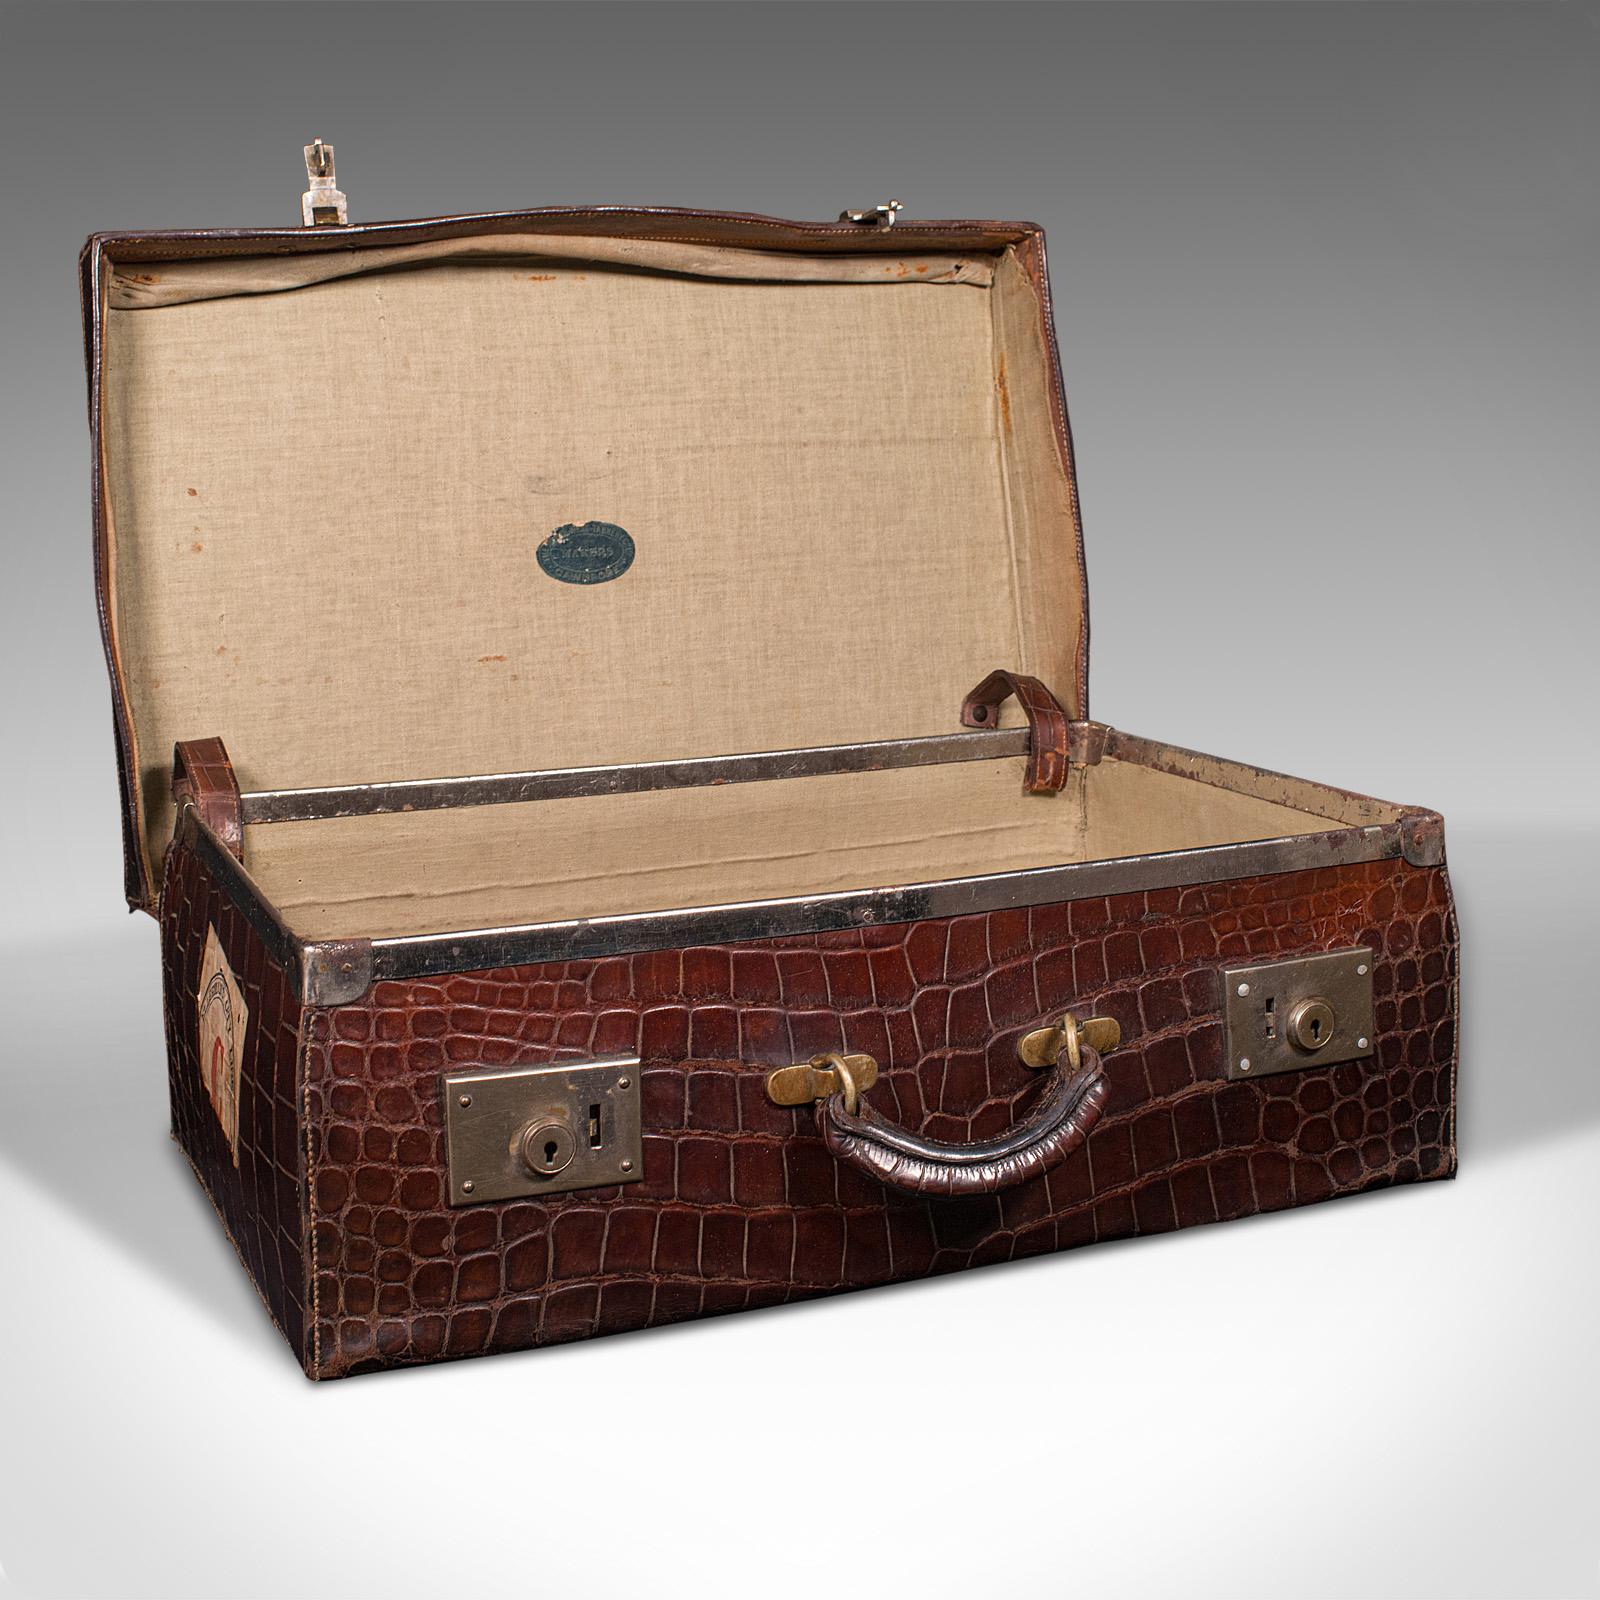 This is an antique traveller's suitcase. An Indian, crocodile skin case, dating to the Edwardian period, circa 1910.

Fascinating colonial era suitcase with antique travel appeal
Displays a desirable aged patina throughout
Genuine crocodile hide